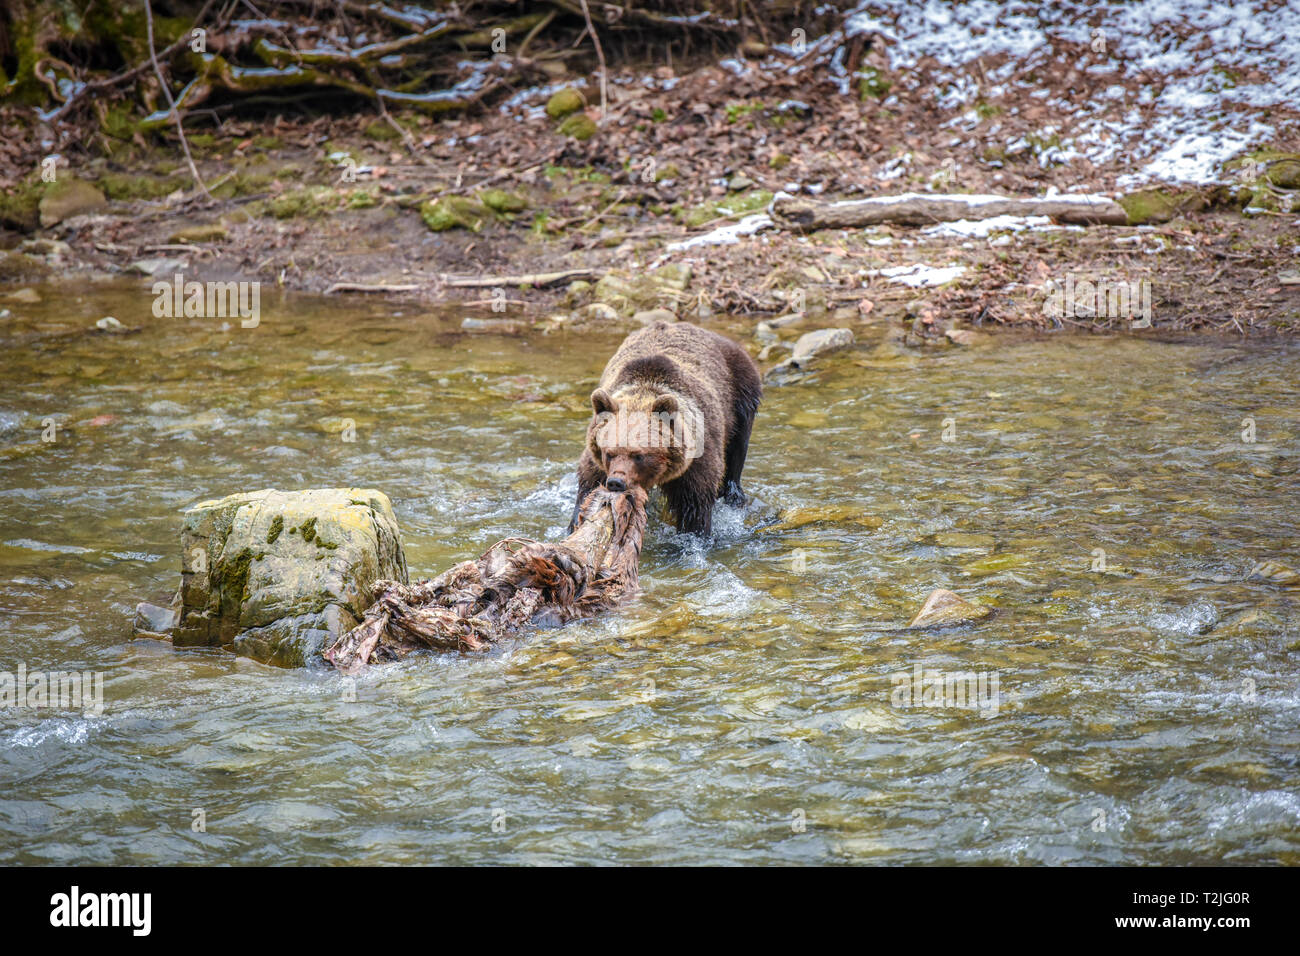 Brown bear with red deer carcass in his mouth going across the river, Carpathian Region, Poland, Eastern Europe. European wildlife. Stock Photo